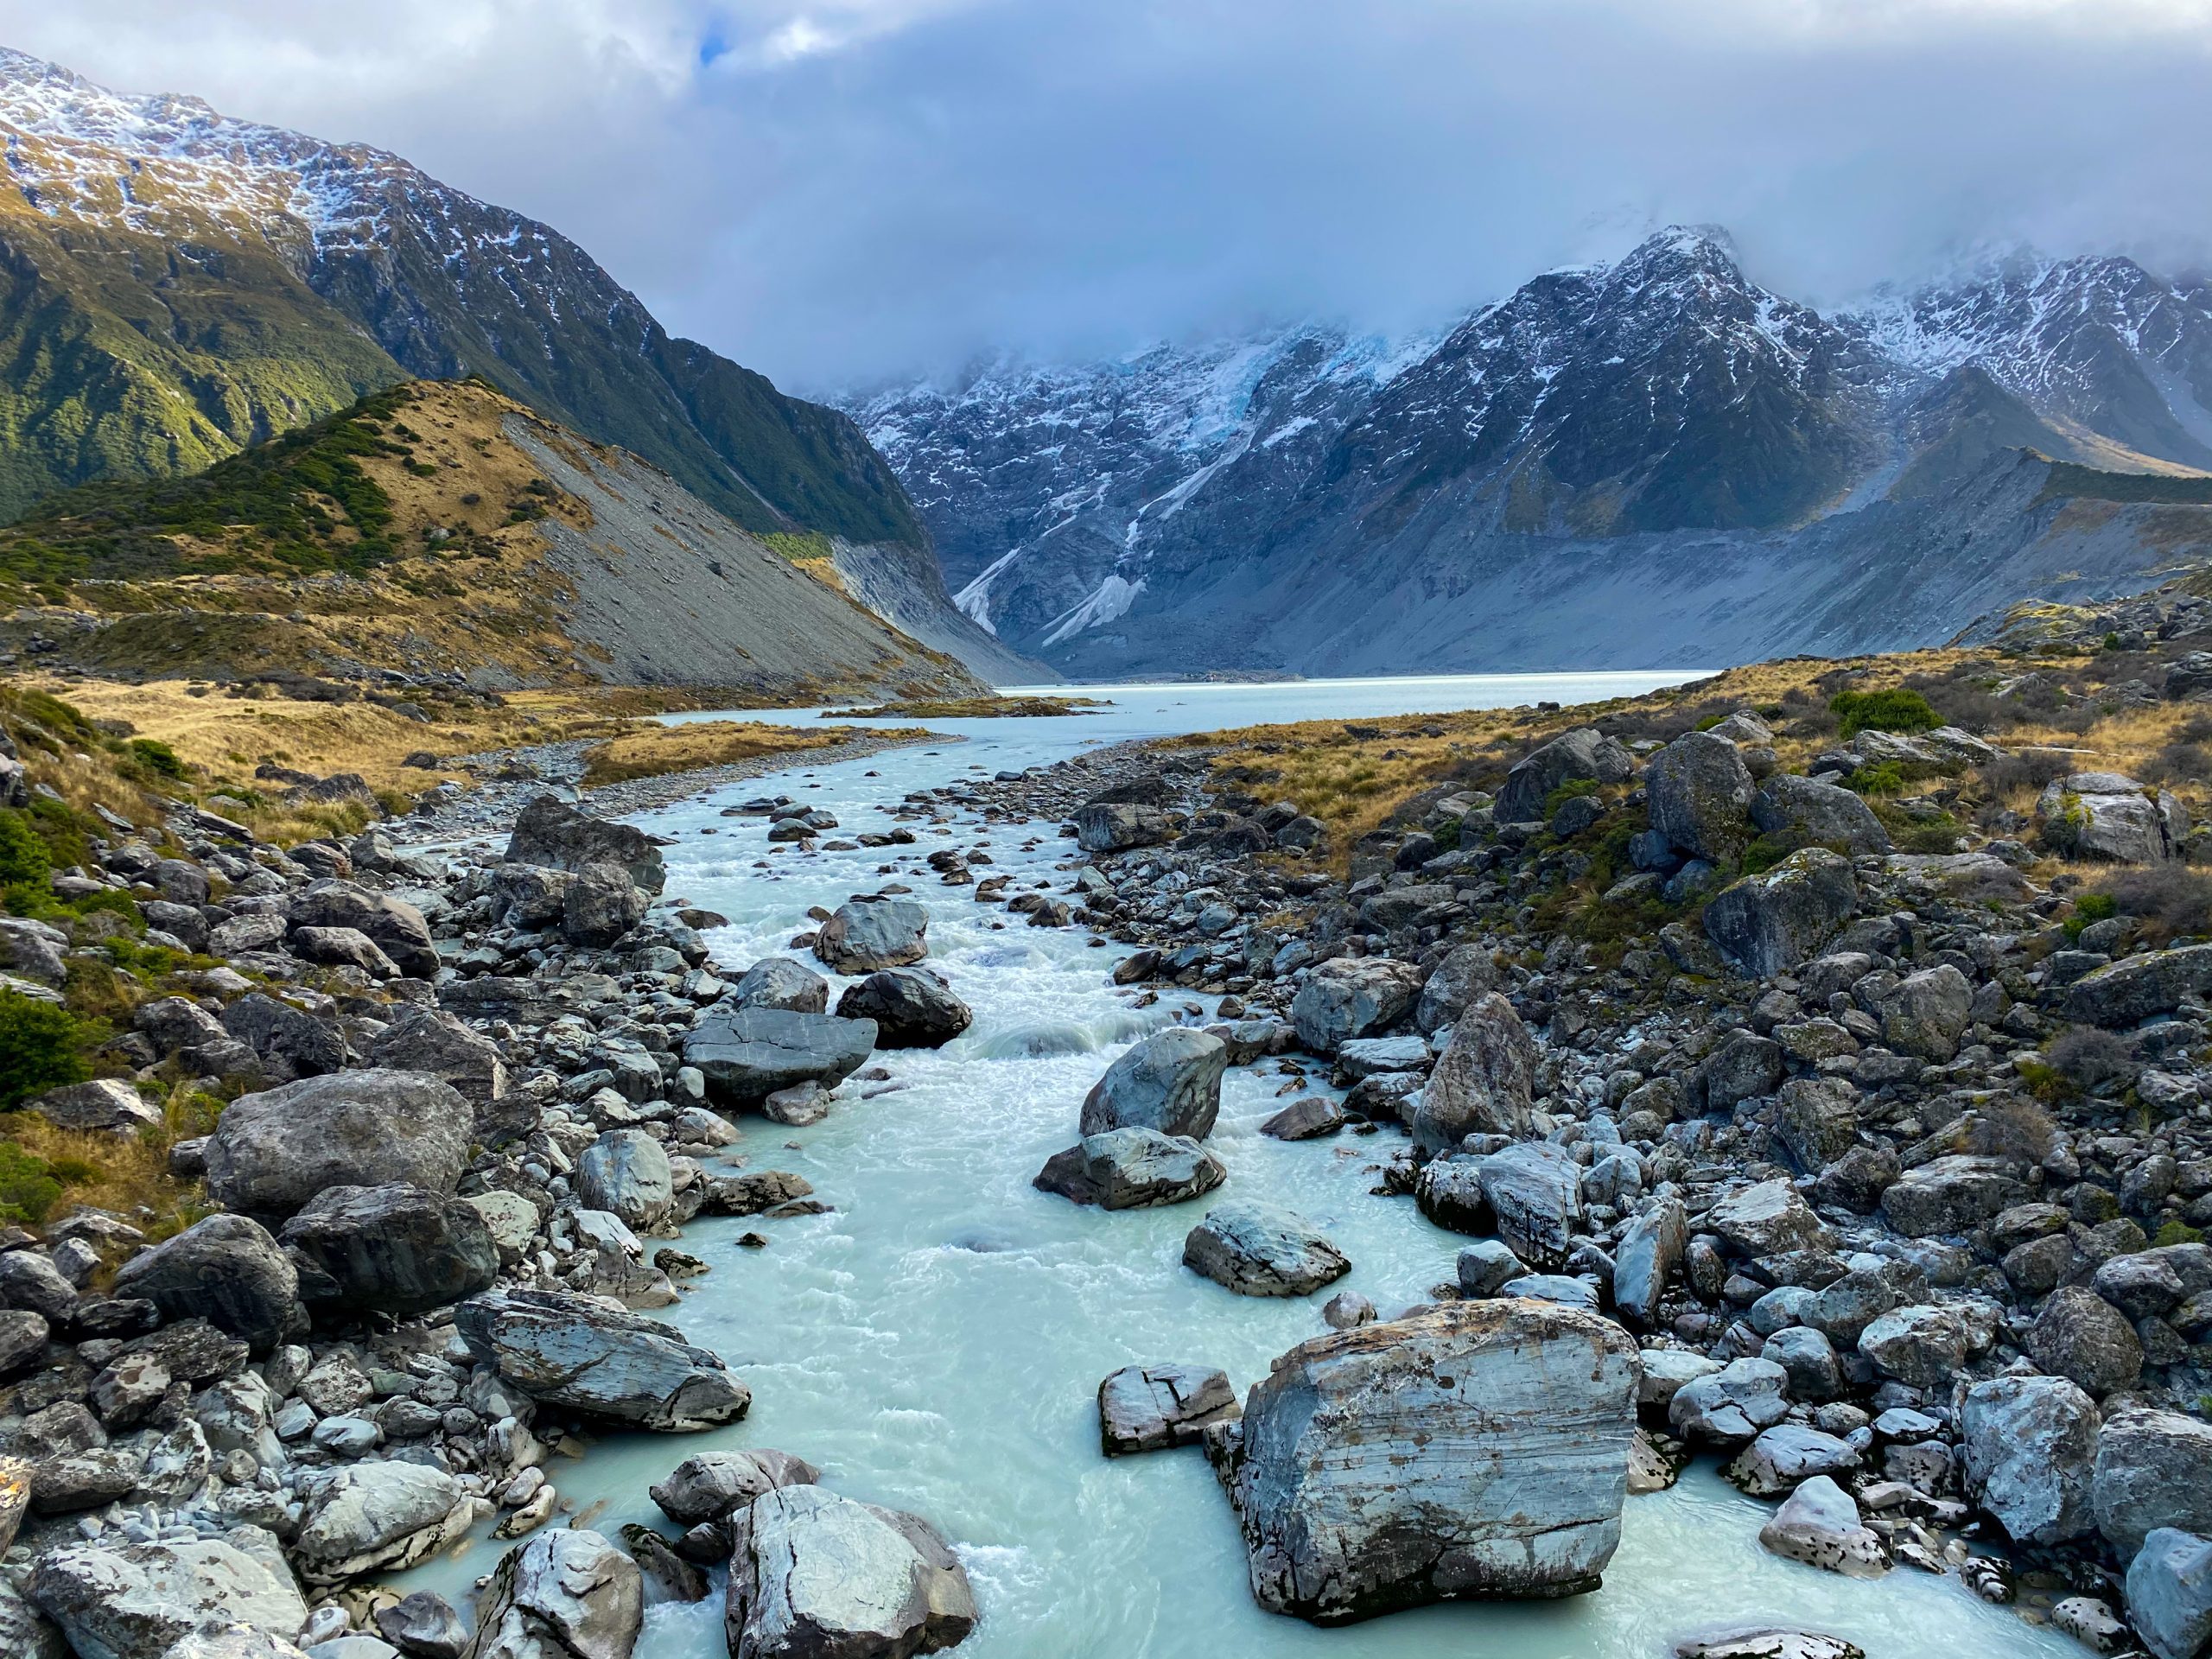 A glacial river running through rocks with snow-capped mountains in the background and fog.